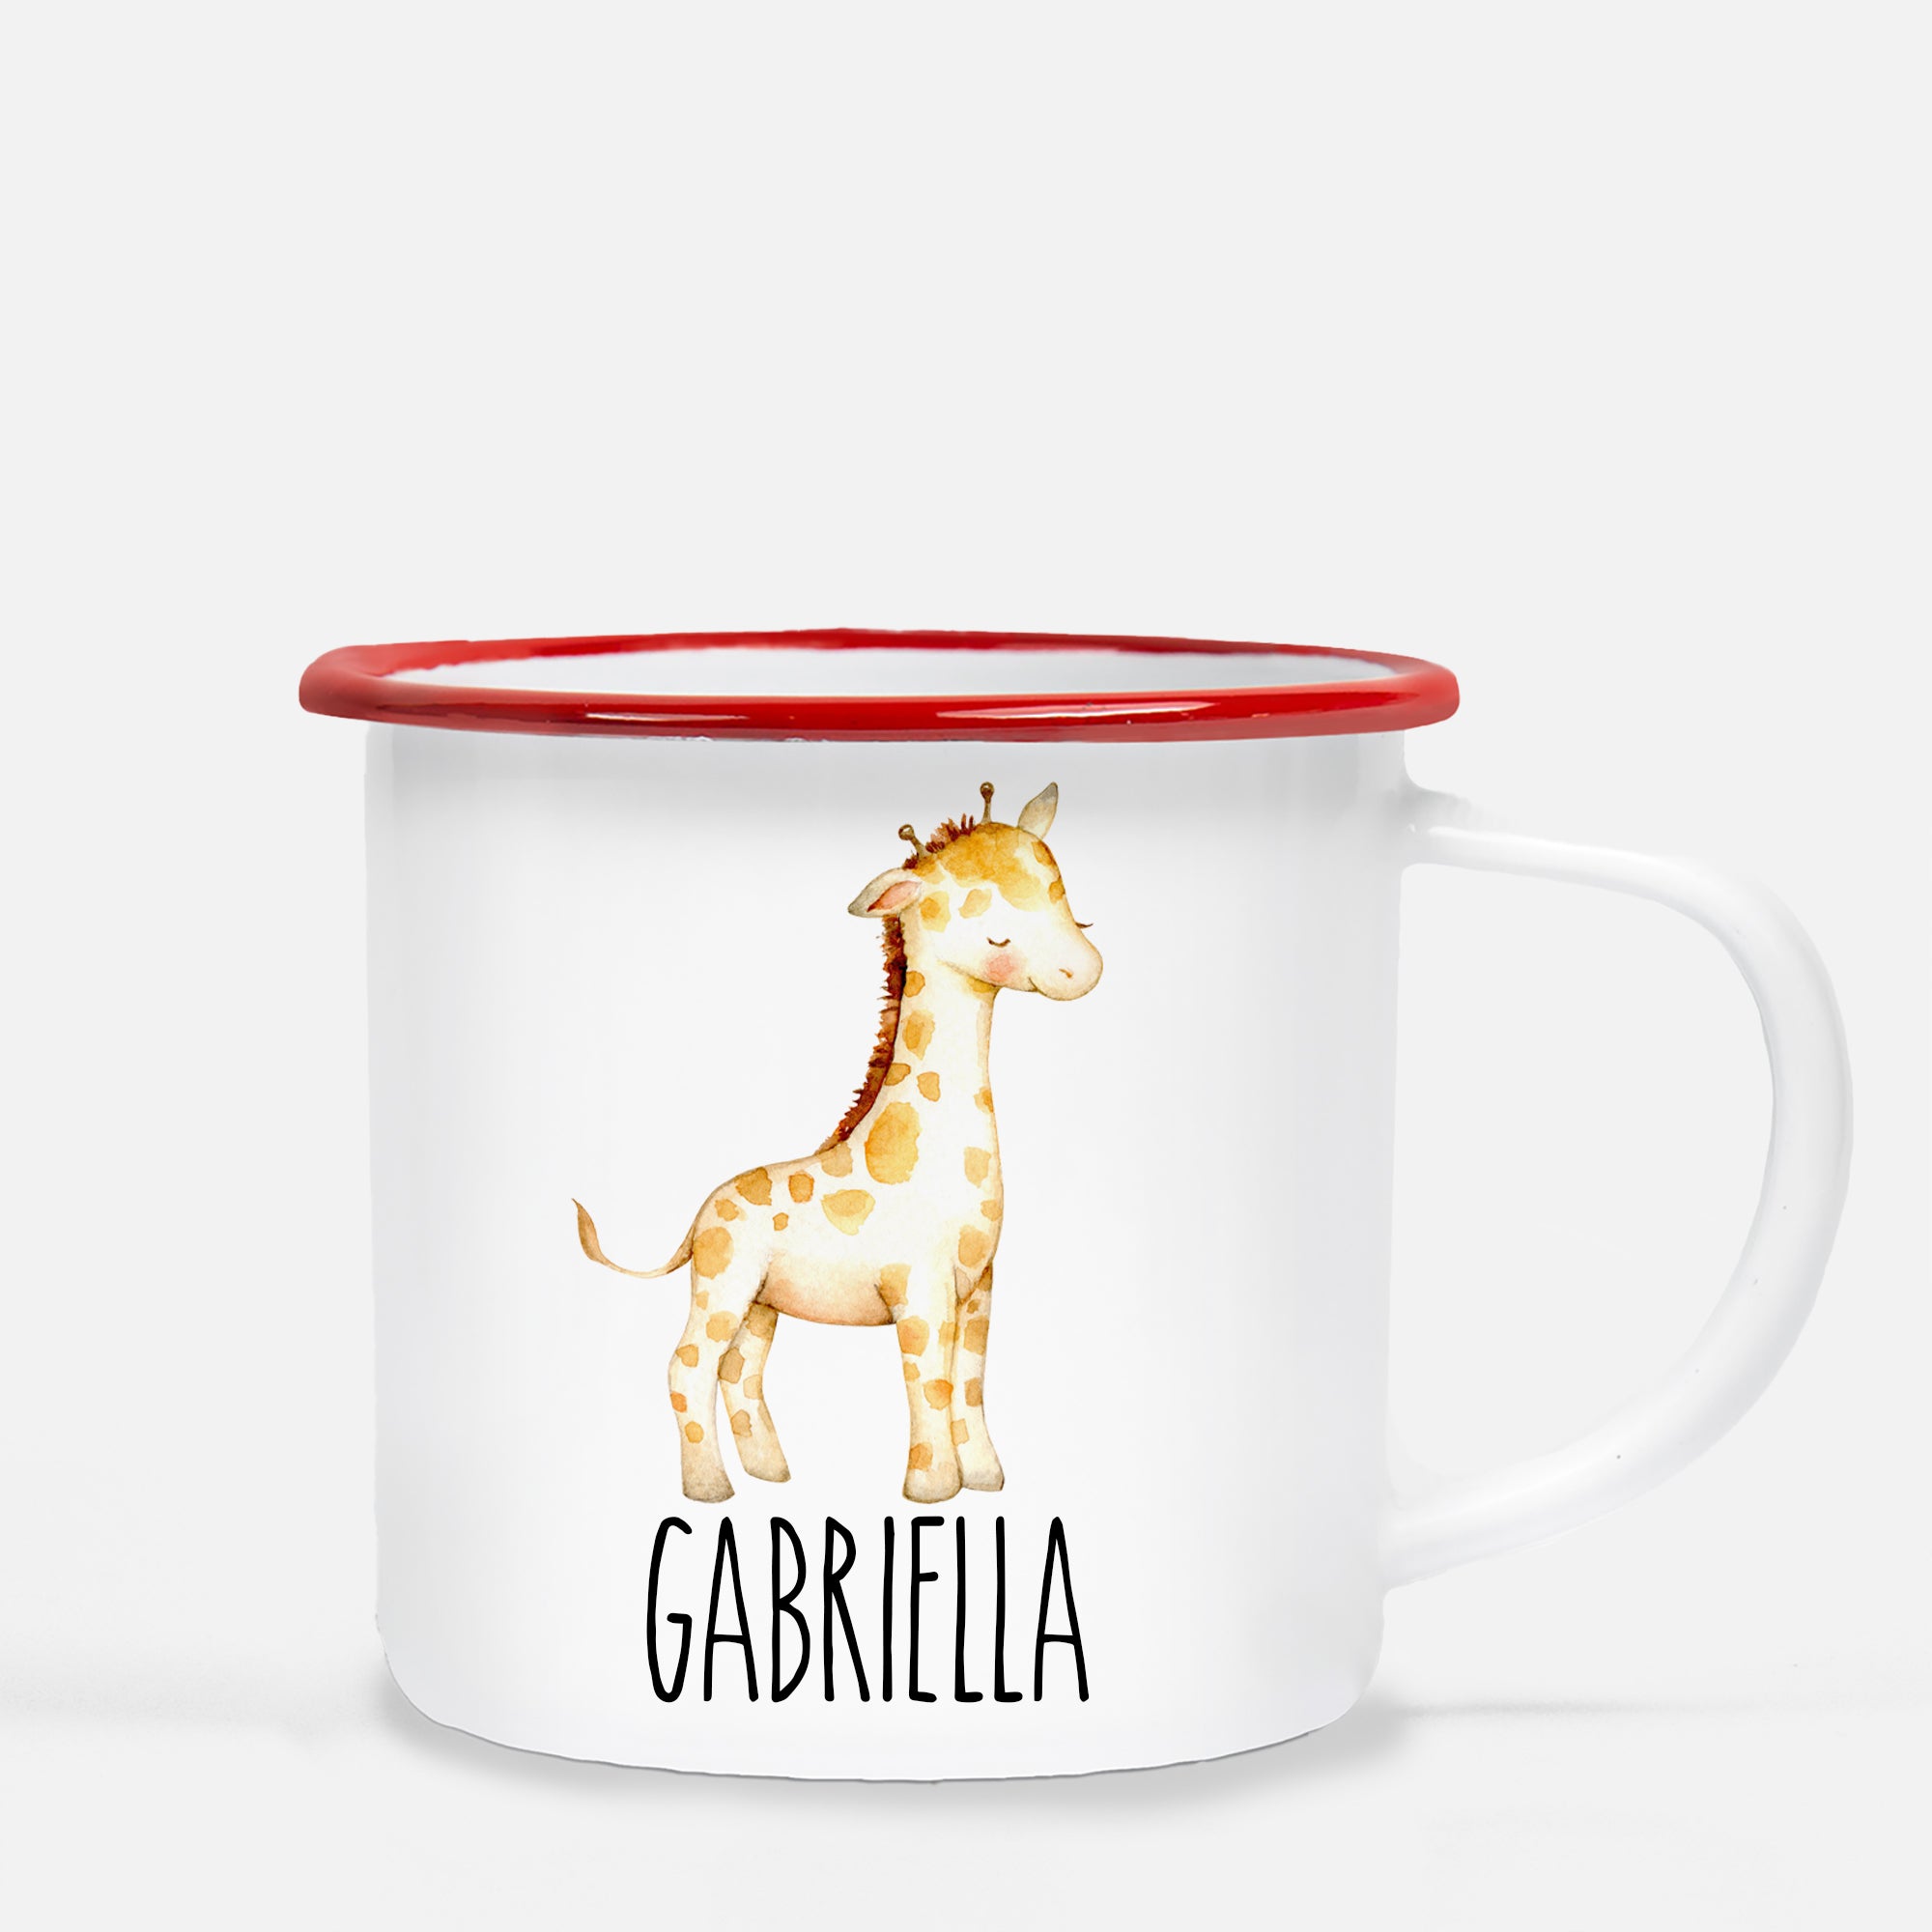 giraffe camp mug, personalized with child's name, Pipsy.com, red lip